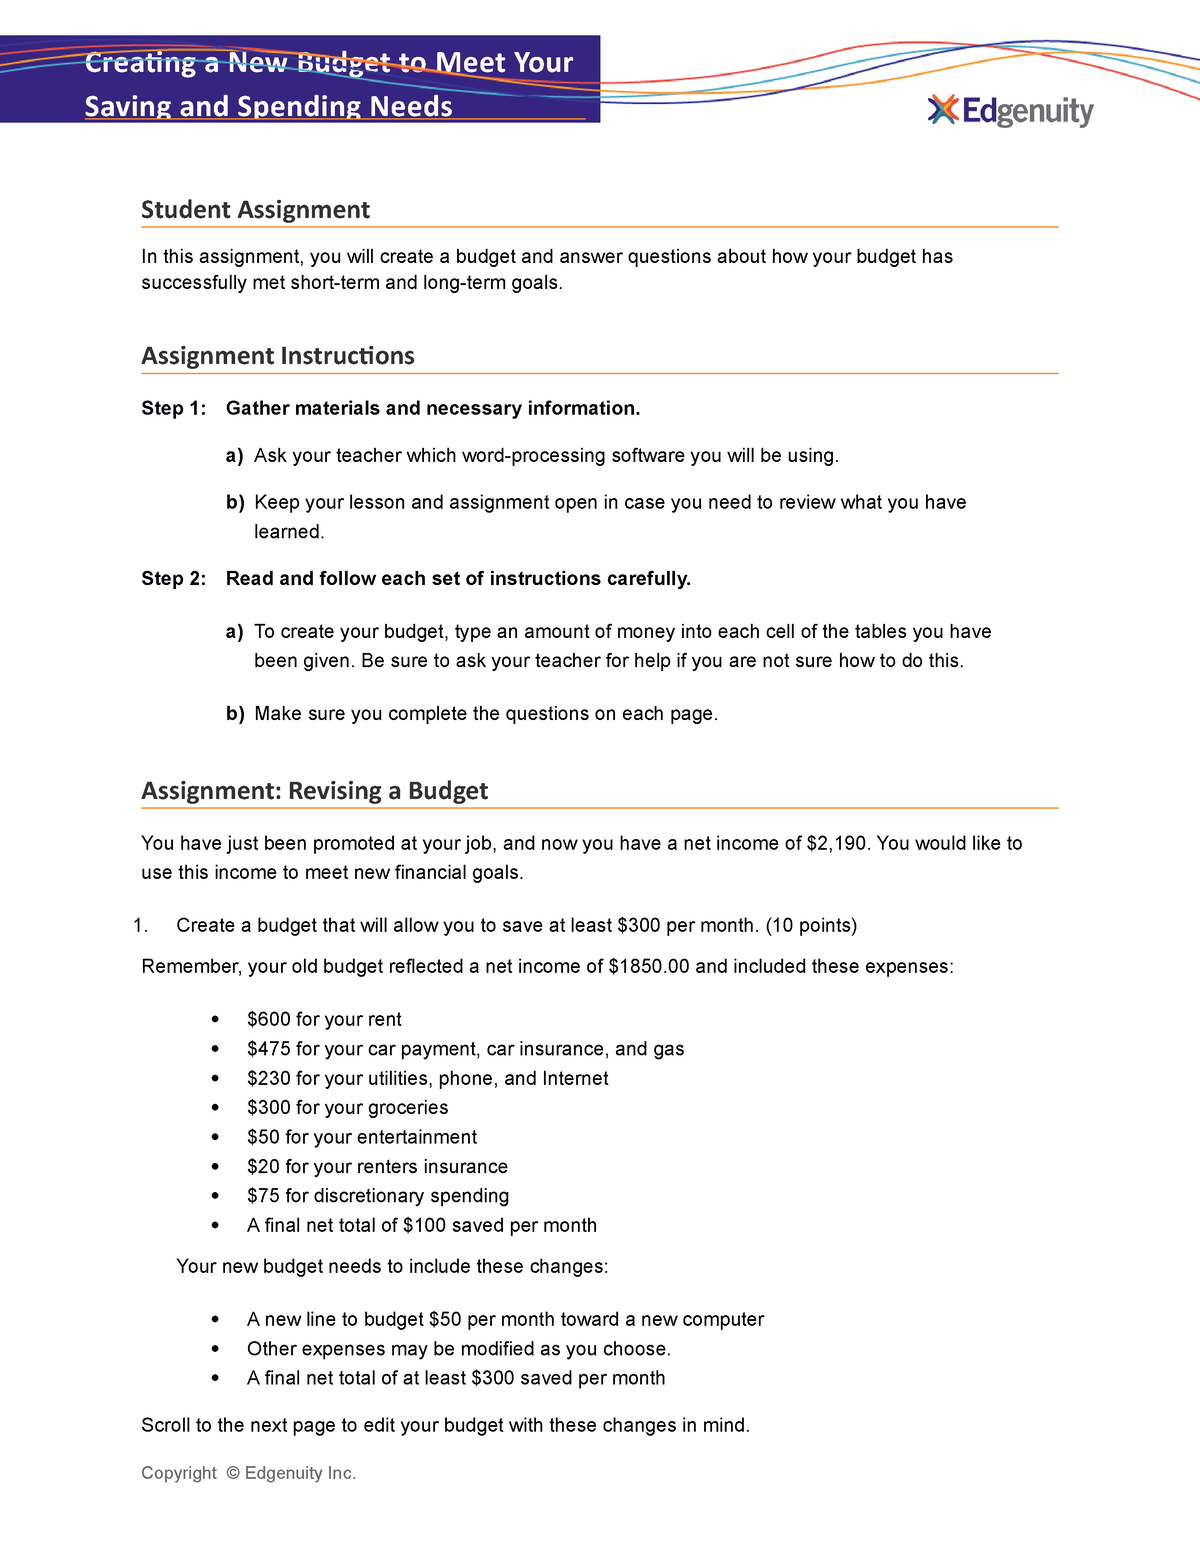 Creating a New Budget Student Assignment - Creating a New Budget